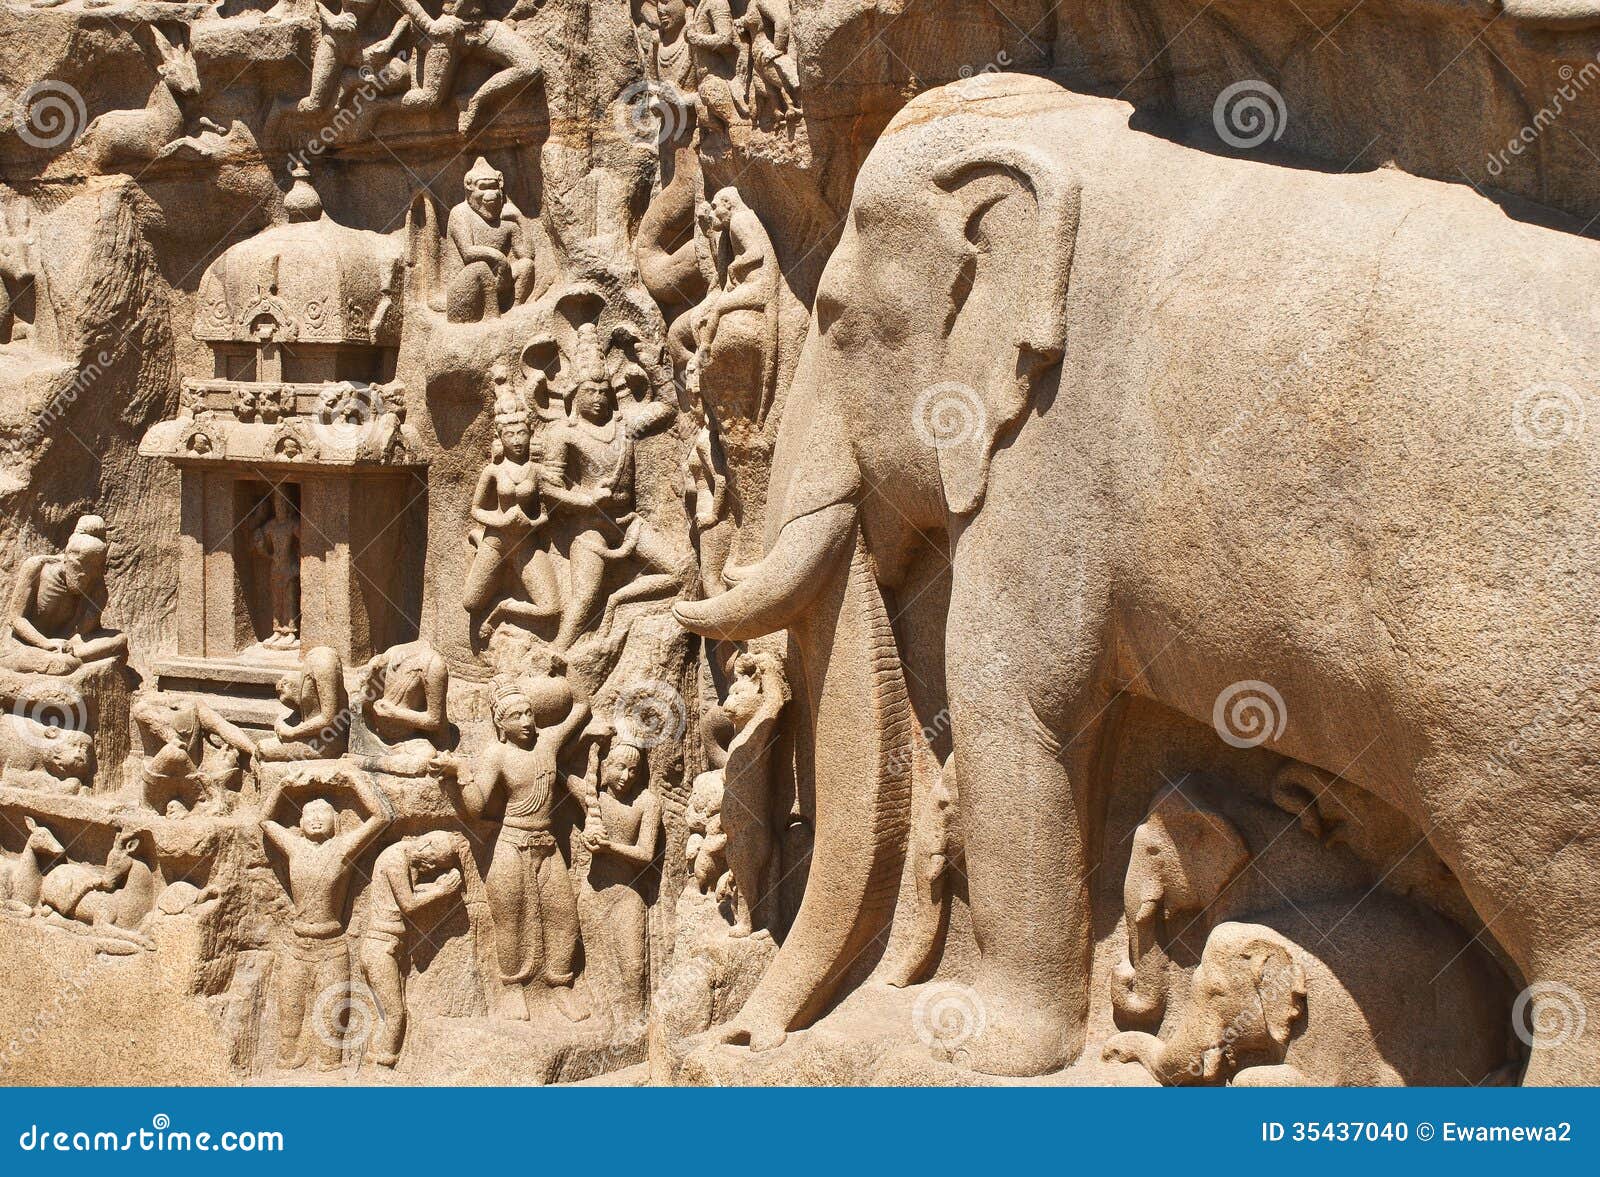 details of descent of the ganges in mahabalipuram, india